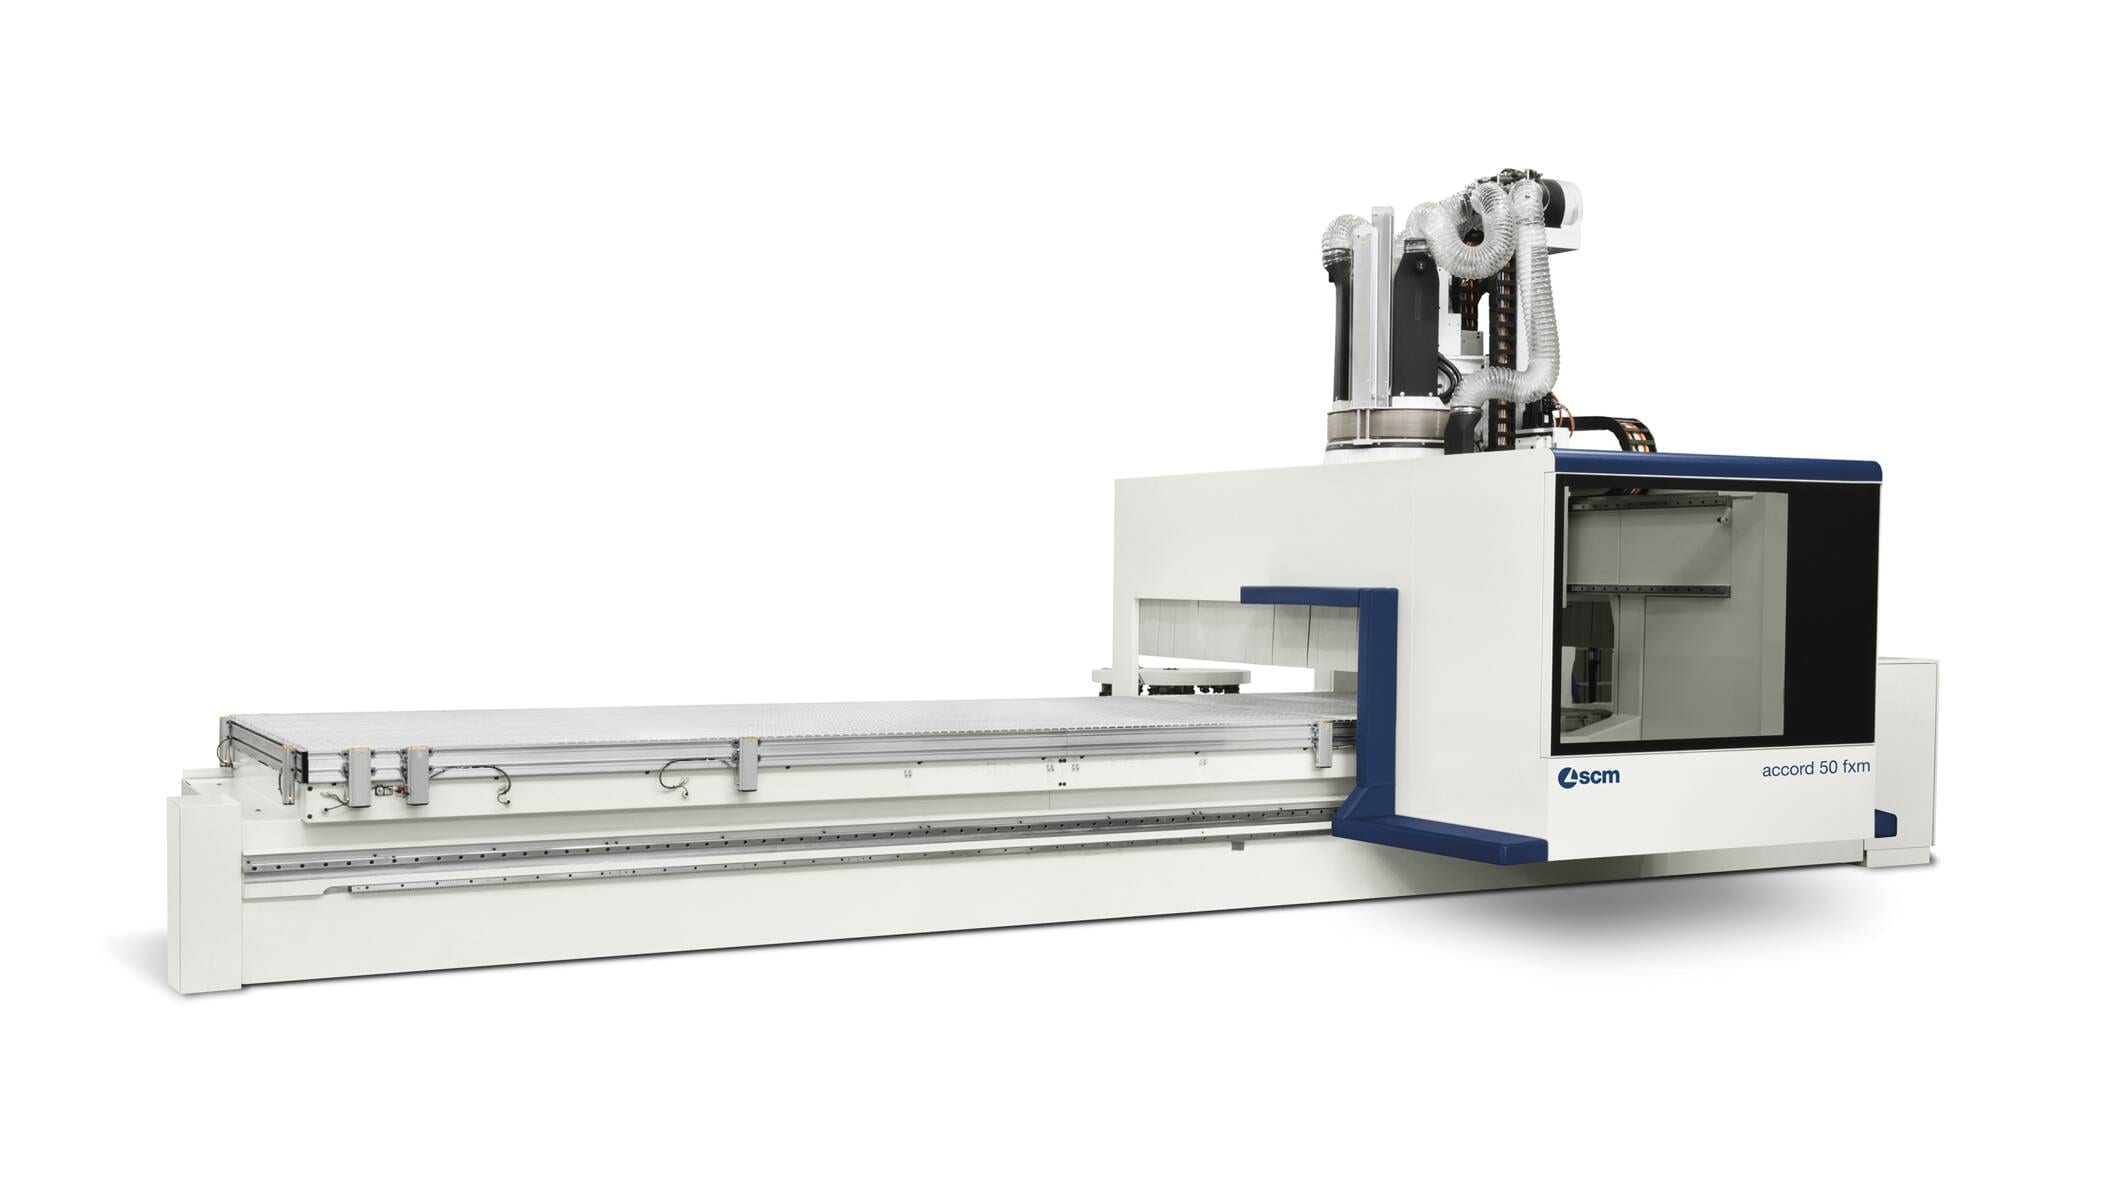 CNC Machining Centers - CNC Nesting Machining Centers for routing and drilling - accord 50 fxm